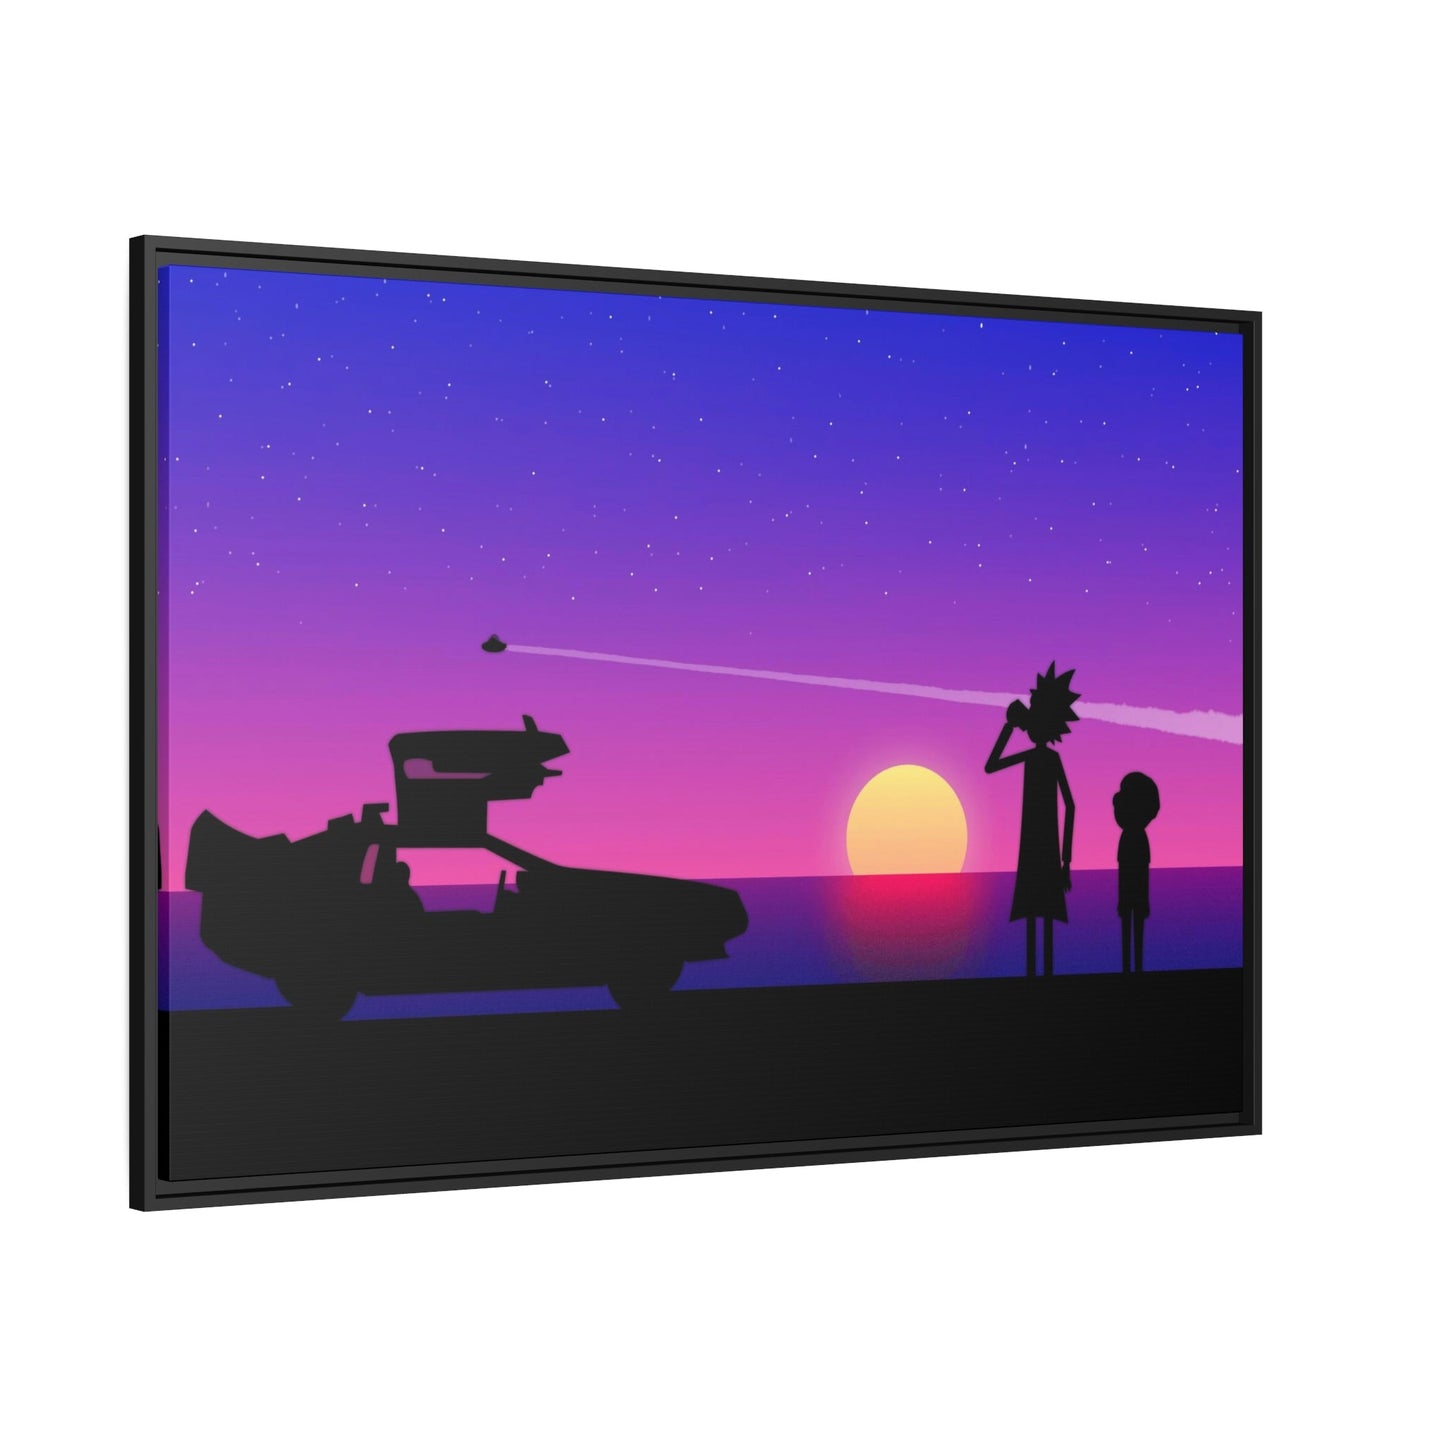 Out-of-This-World Creativity: Framed Canvas Rick and Morty Art for Wall Decor